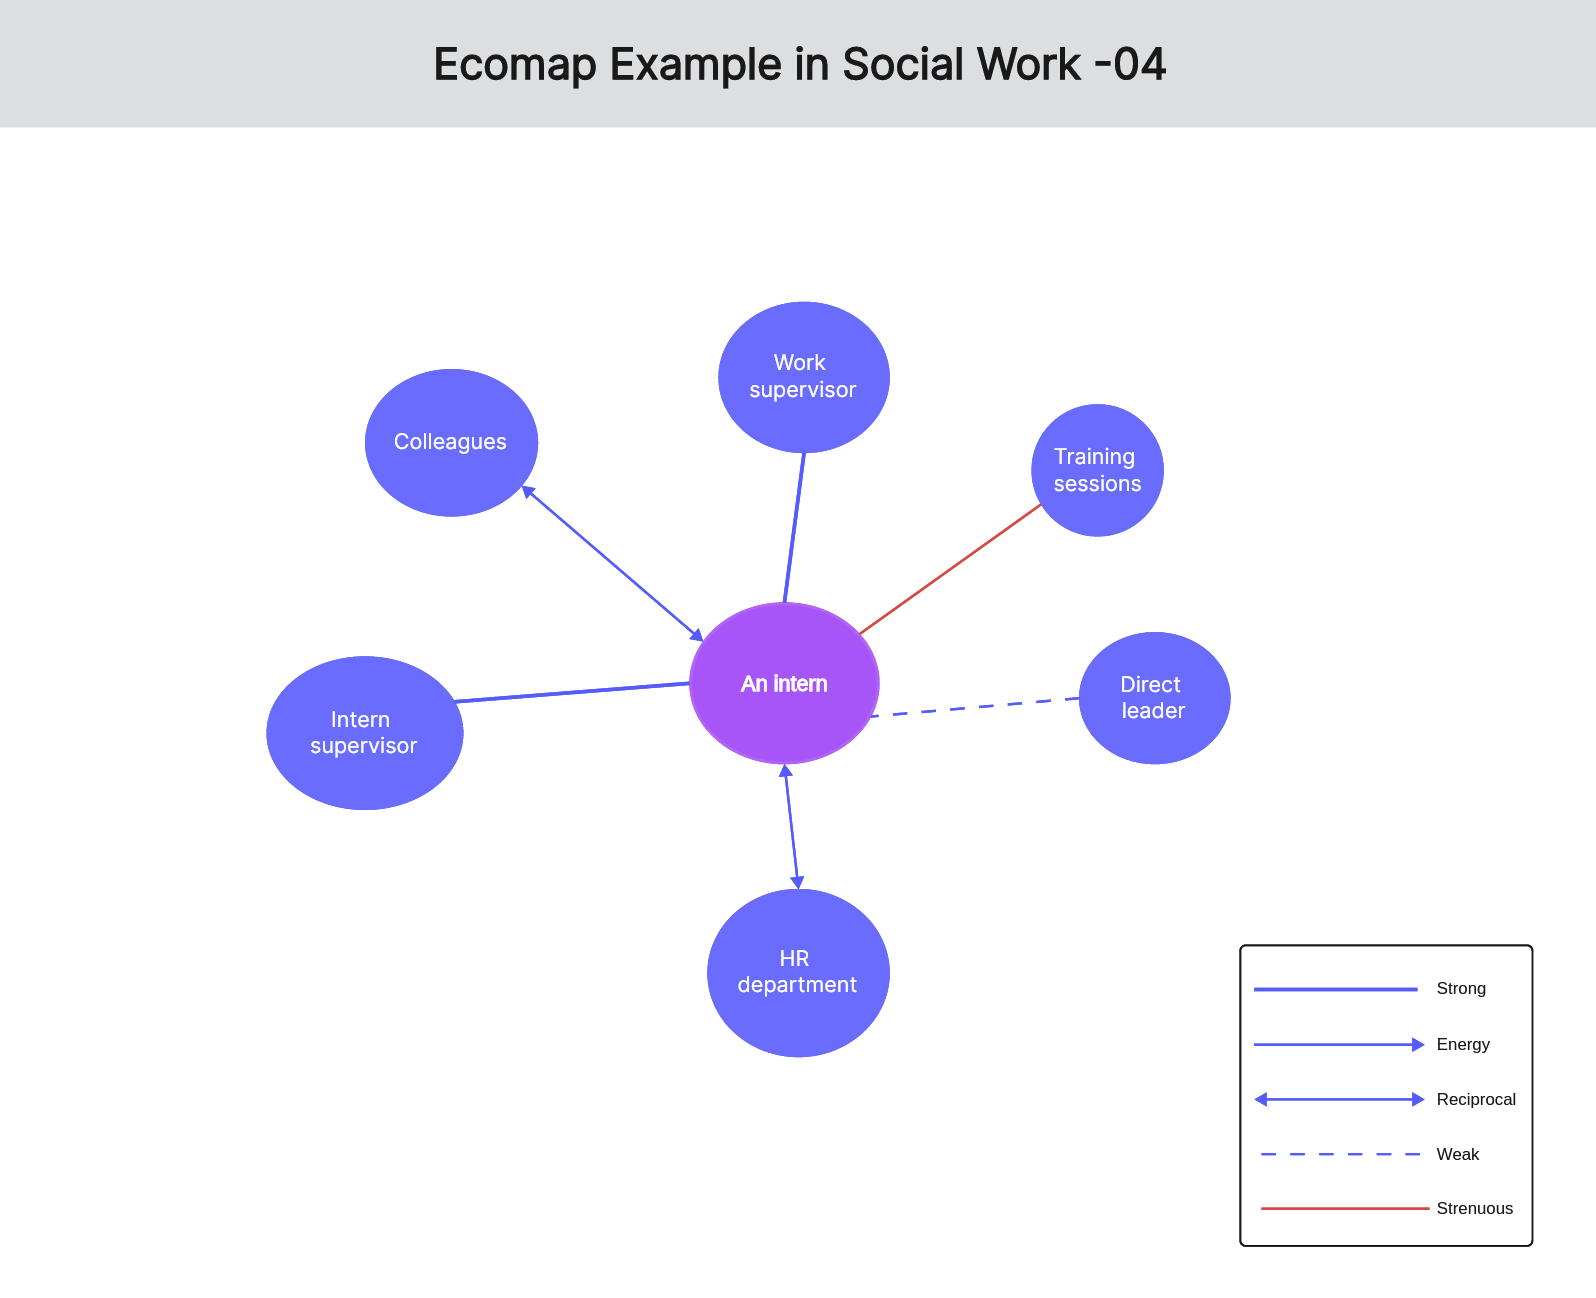 ecomap-examples-in-social-work-04